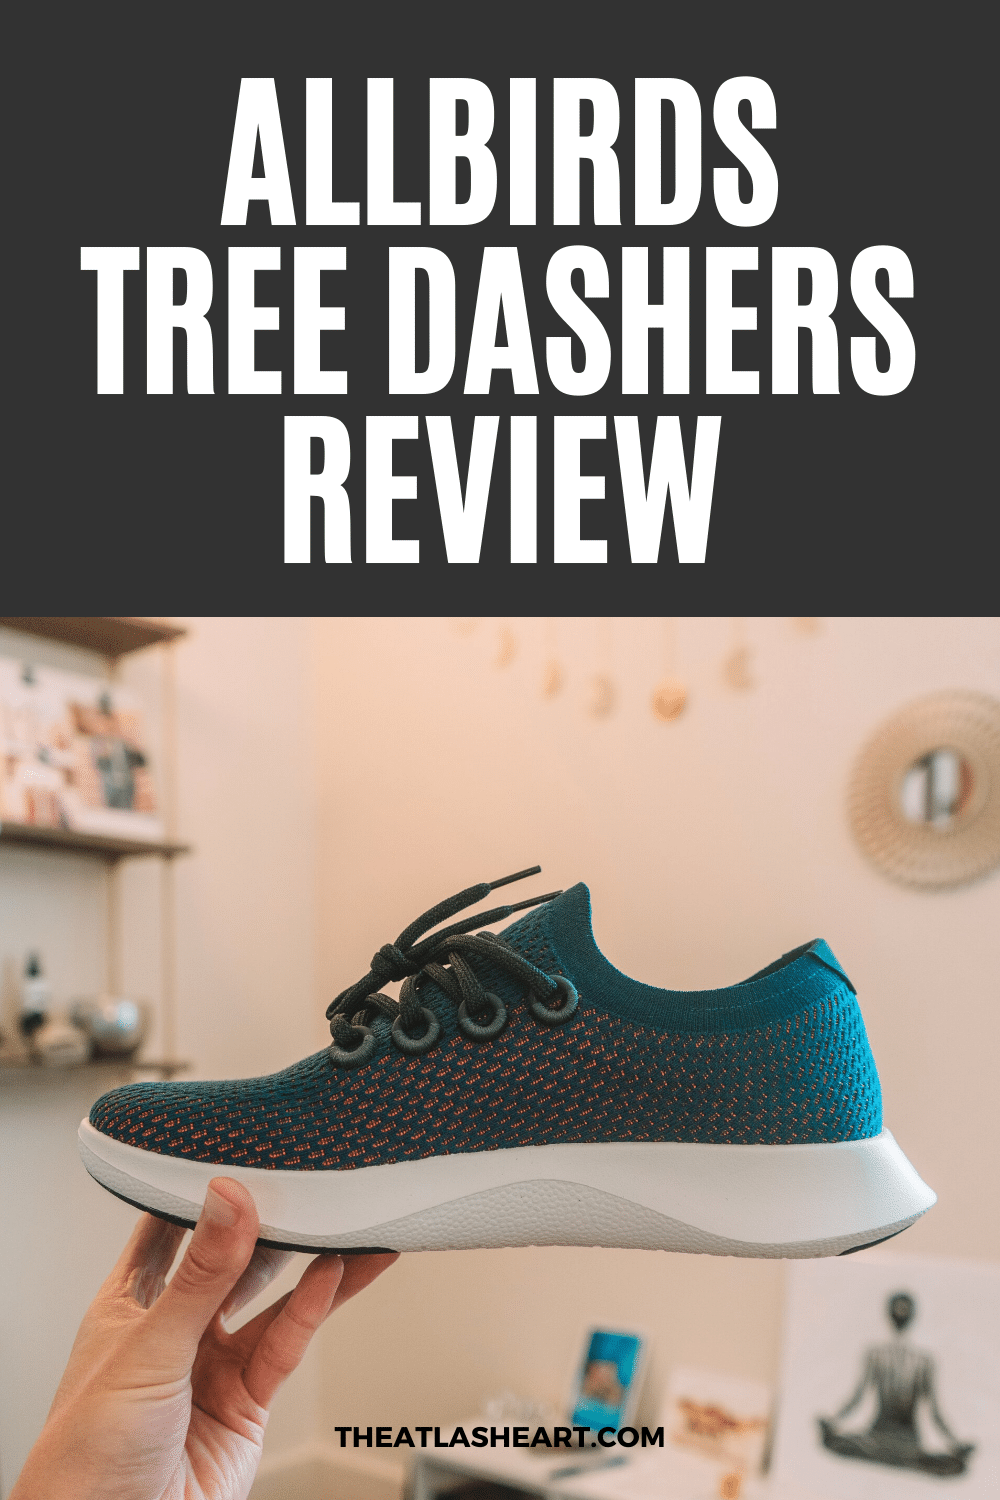 Allbirds Tree Dashers Review: My Thoughts on Allbirds Running Shoes